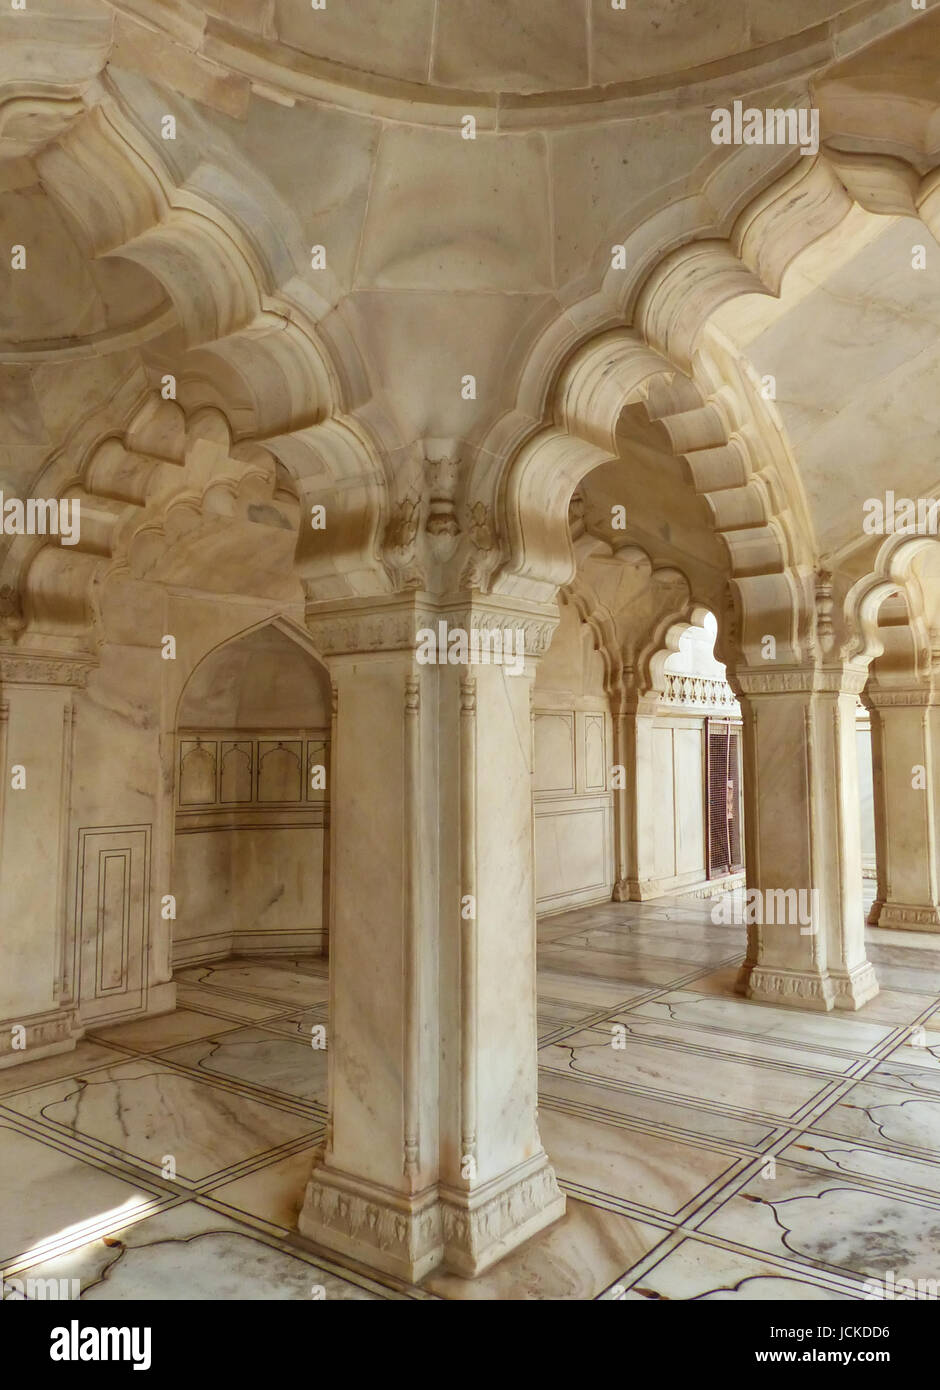 Interior of Nagina Masjid (Gem Mosque) in Agra Fort, Uttar Pradesh, India. It was build in 1635 by Shah Jahan for the ladies of his harem and made ent Stock Photo